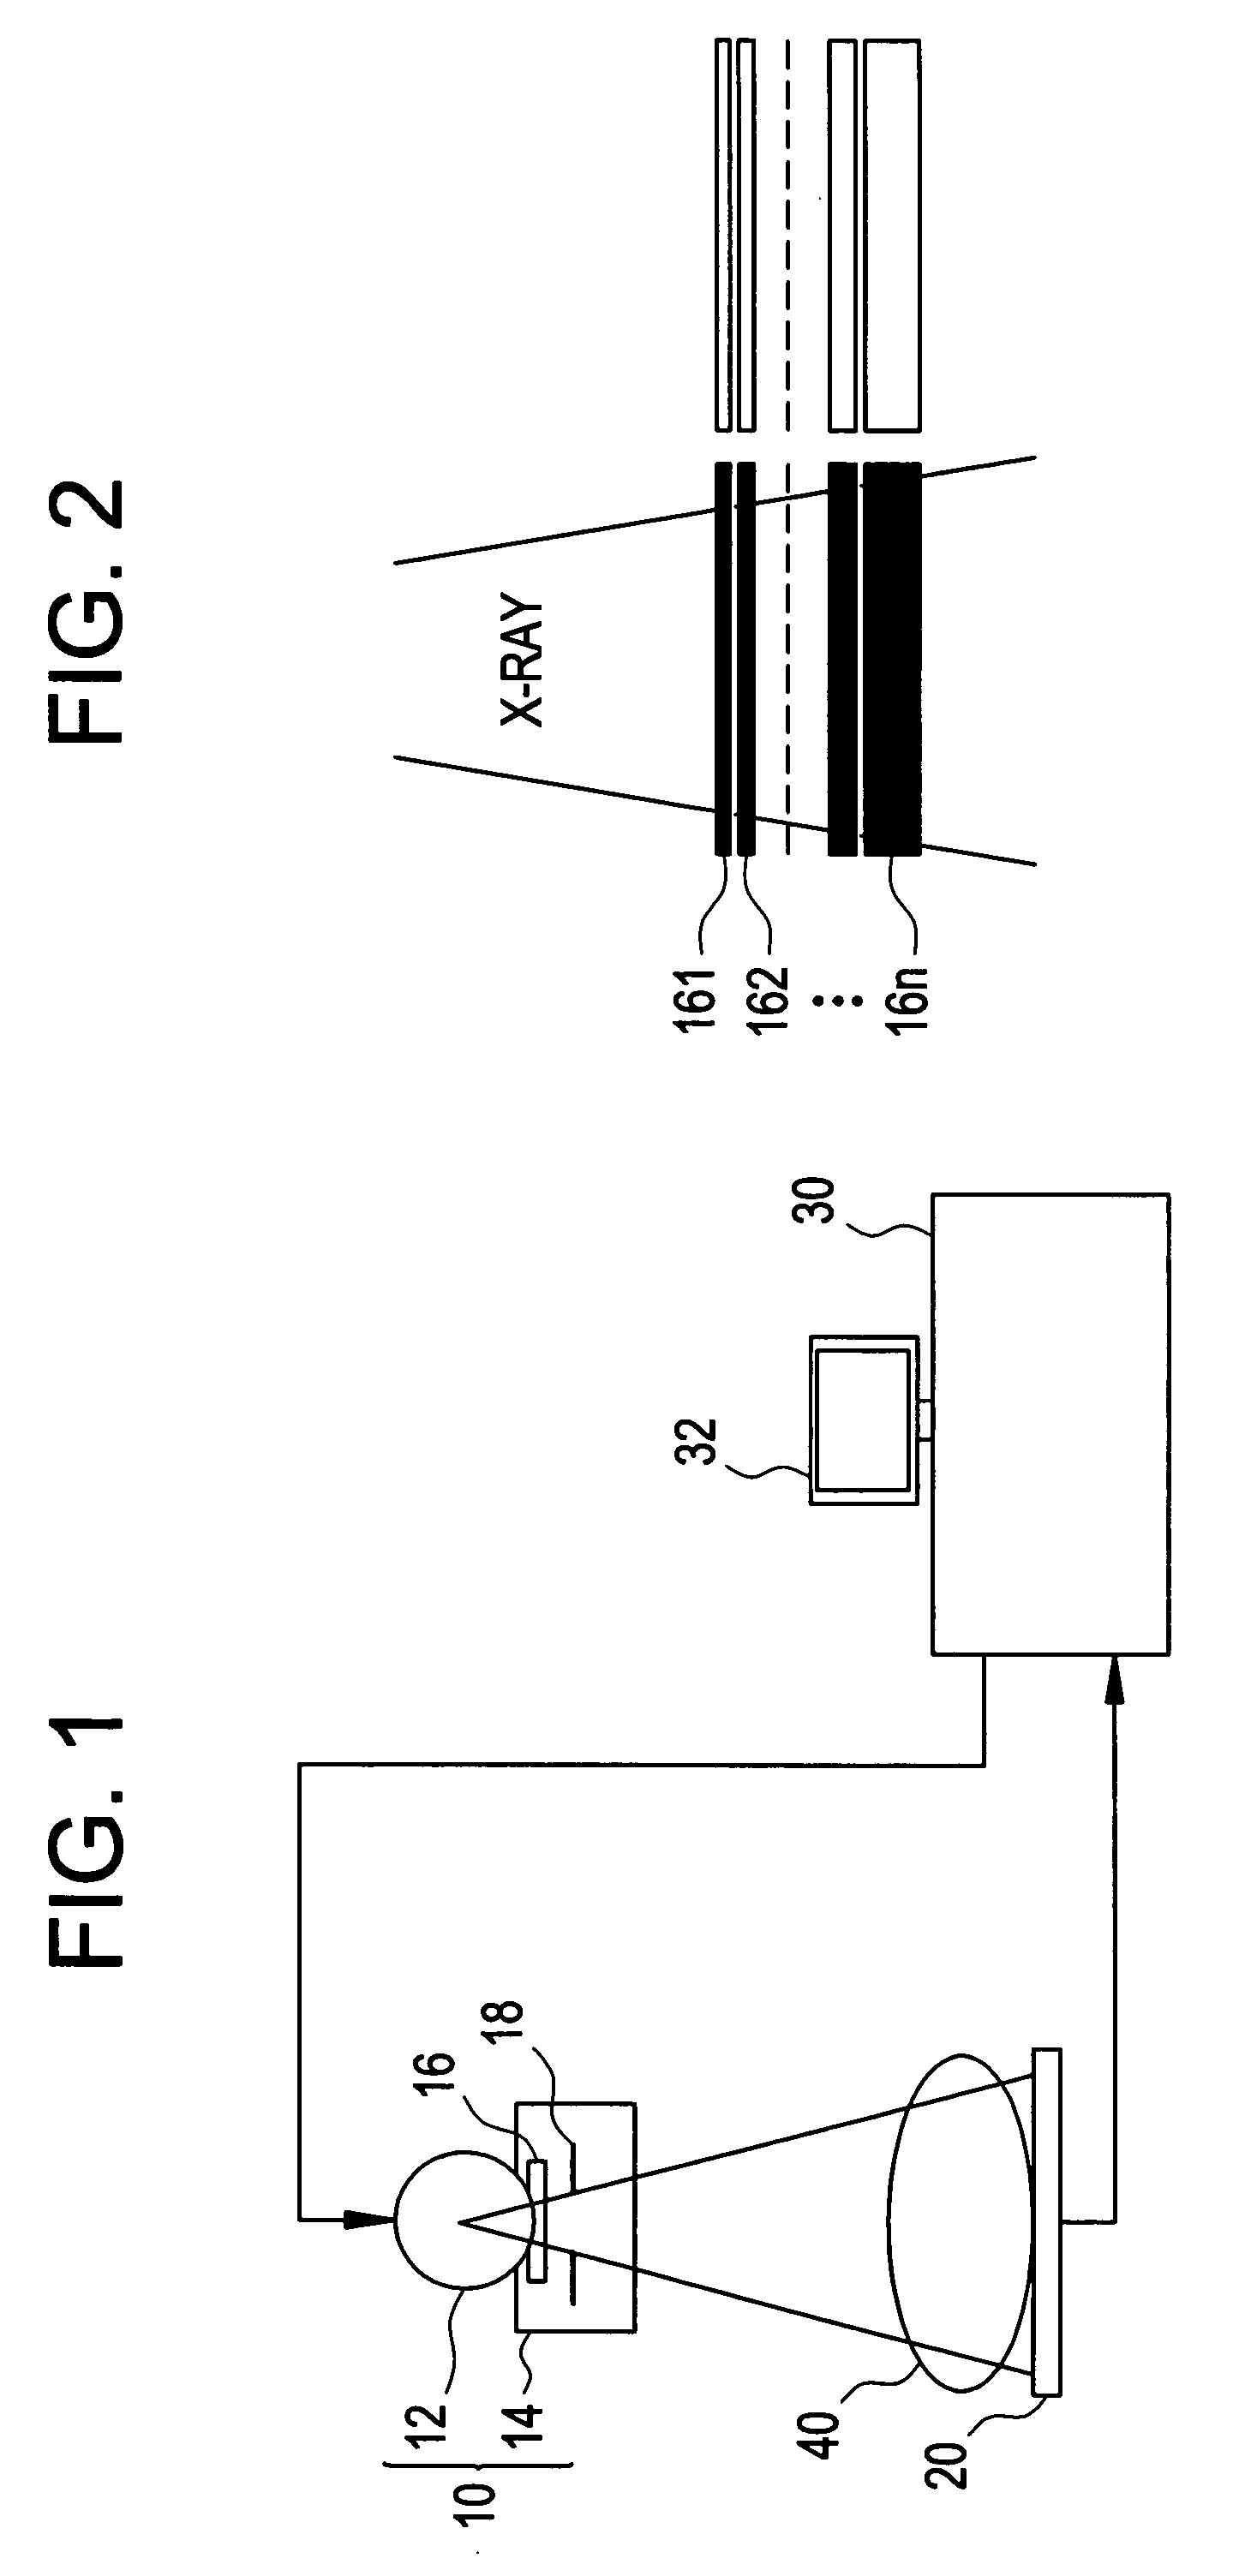 Filter and X-ray imaging device